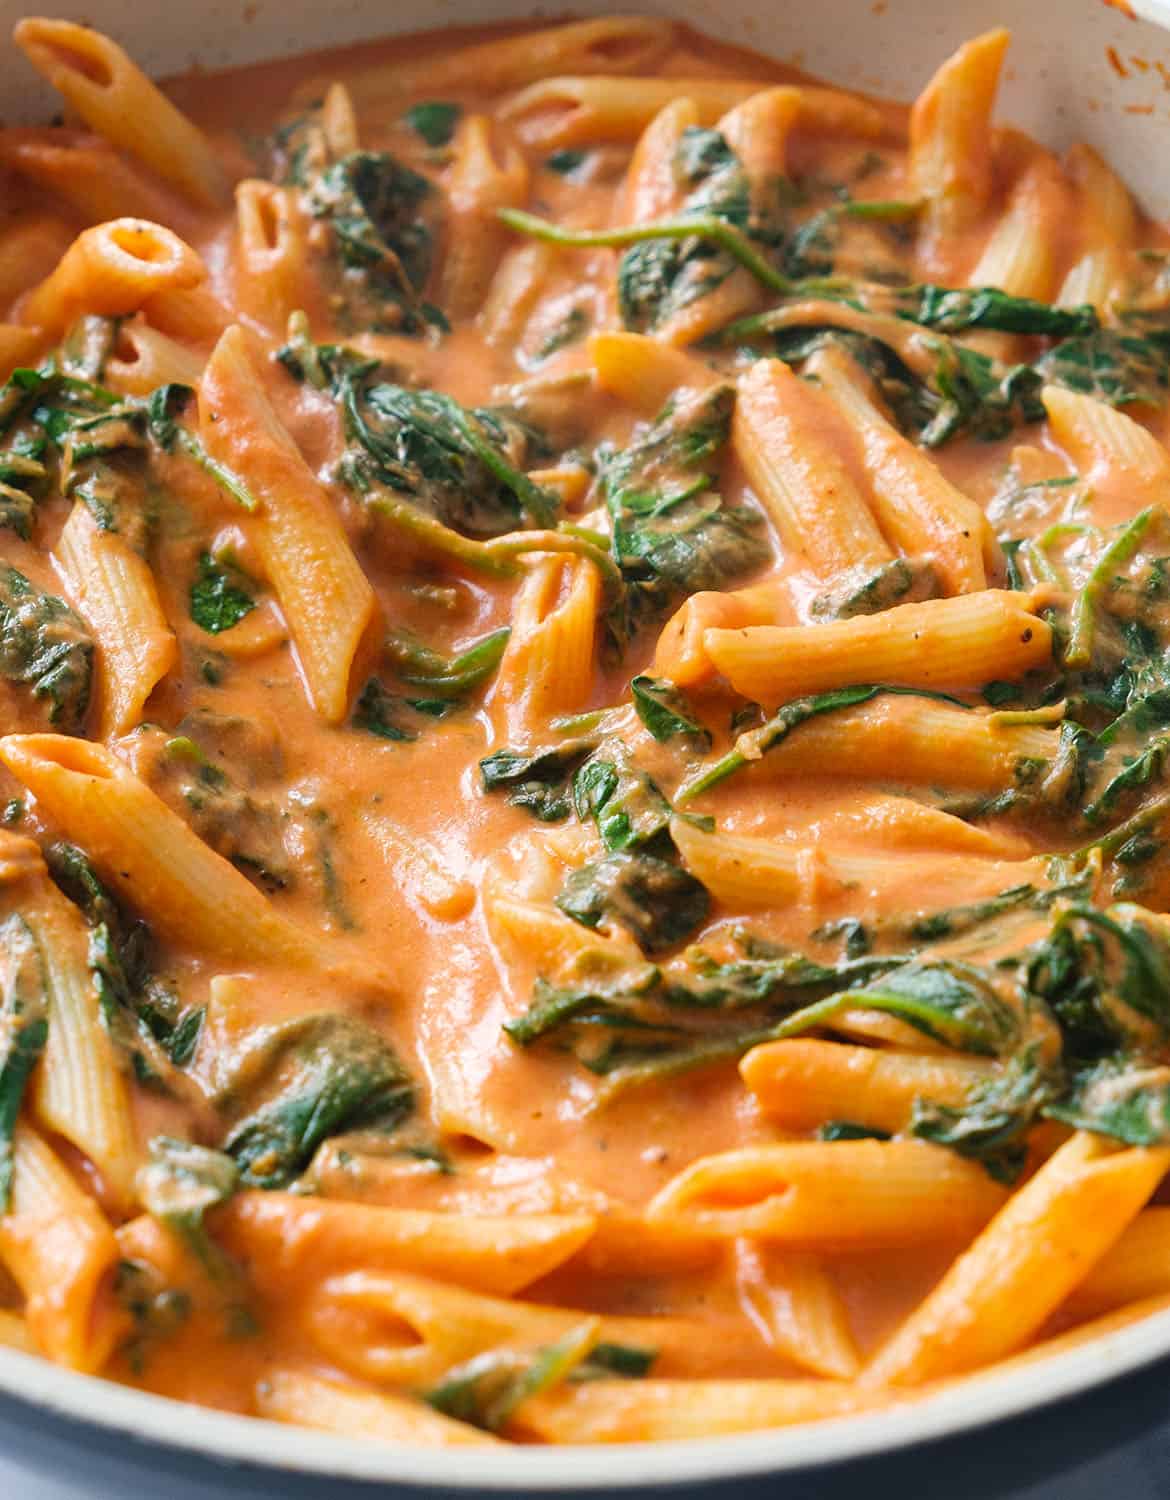 Close-up of a skillet full of creamy tomato spinach pasta coated in velvety sauce.